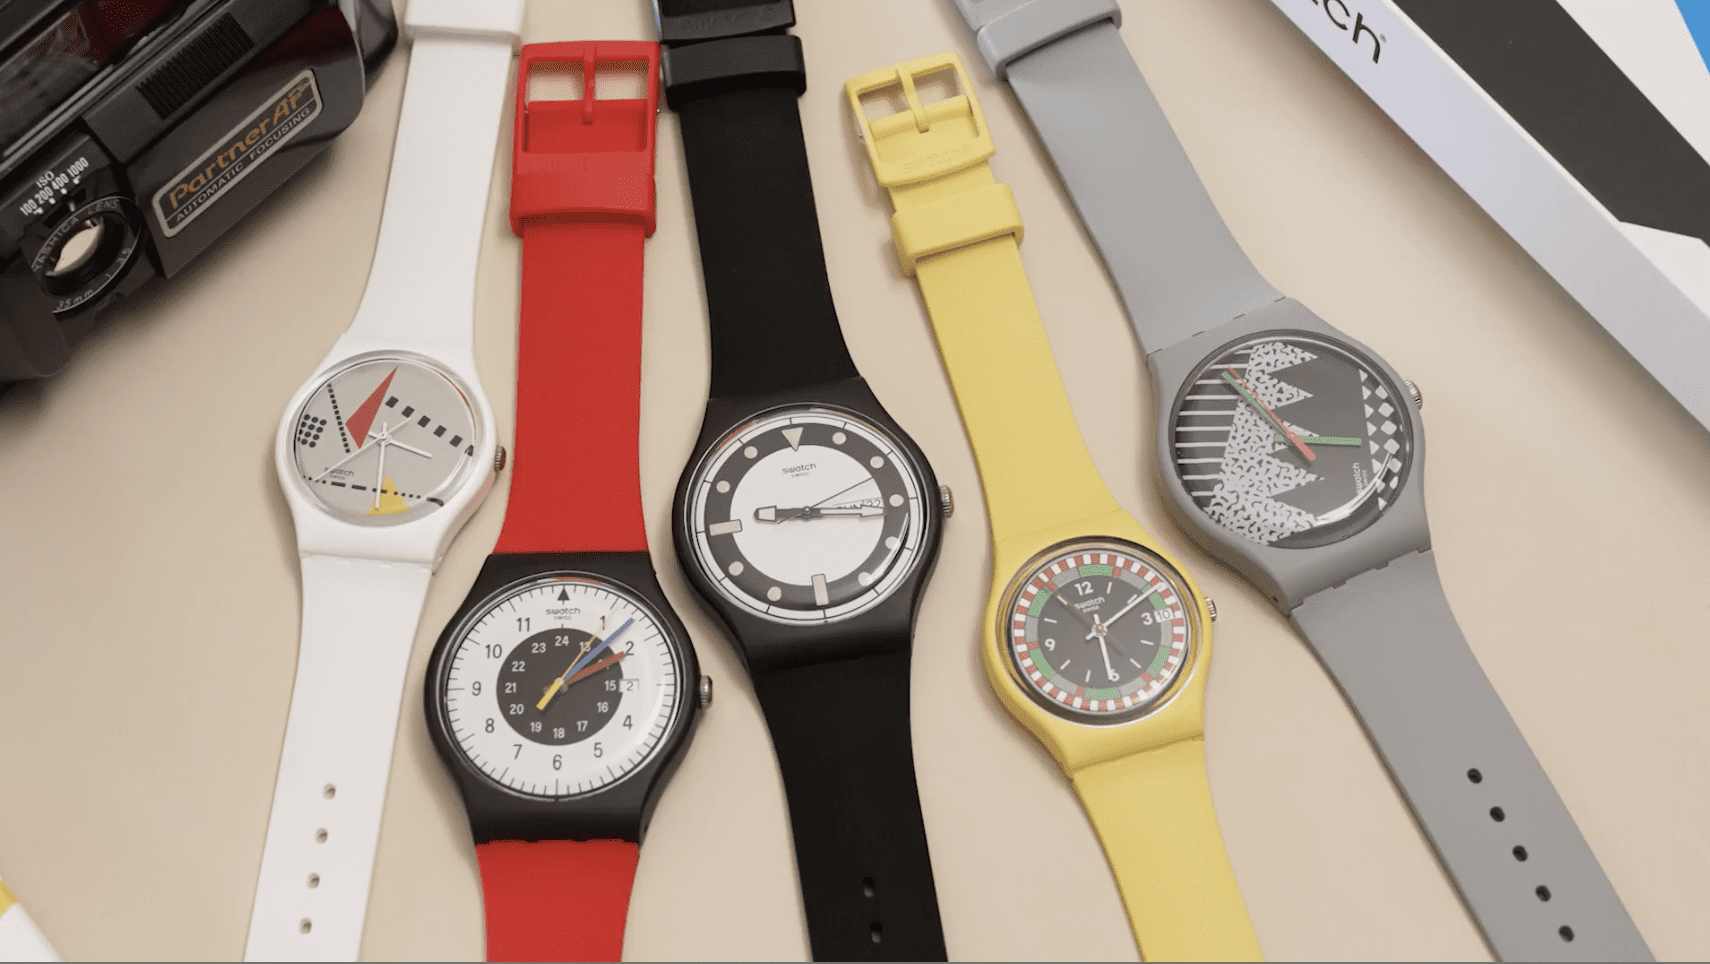 VIDEO: Relive the 80s with the Swatch BIOCERAMIC 1984 Reloaded Collection